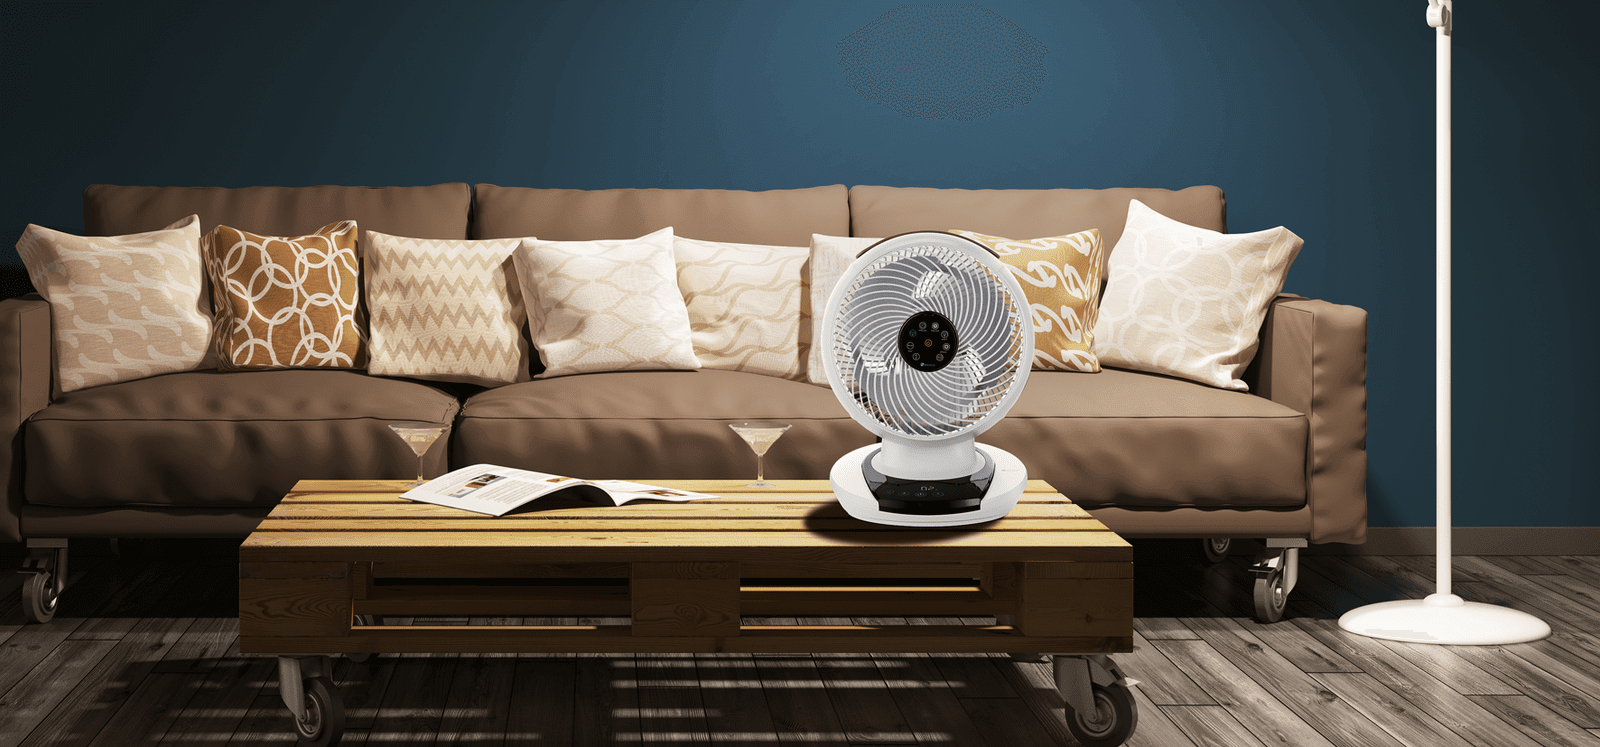 Revolutionize Your Room Cooling with MeacoFan 1056 Air Circulator - Solenco South Africa